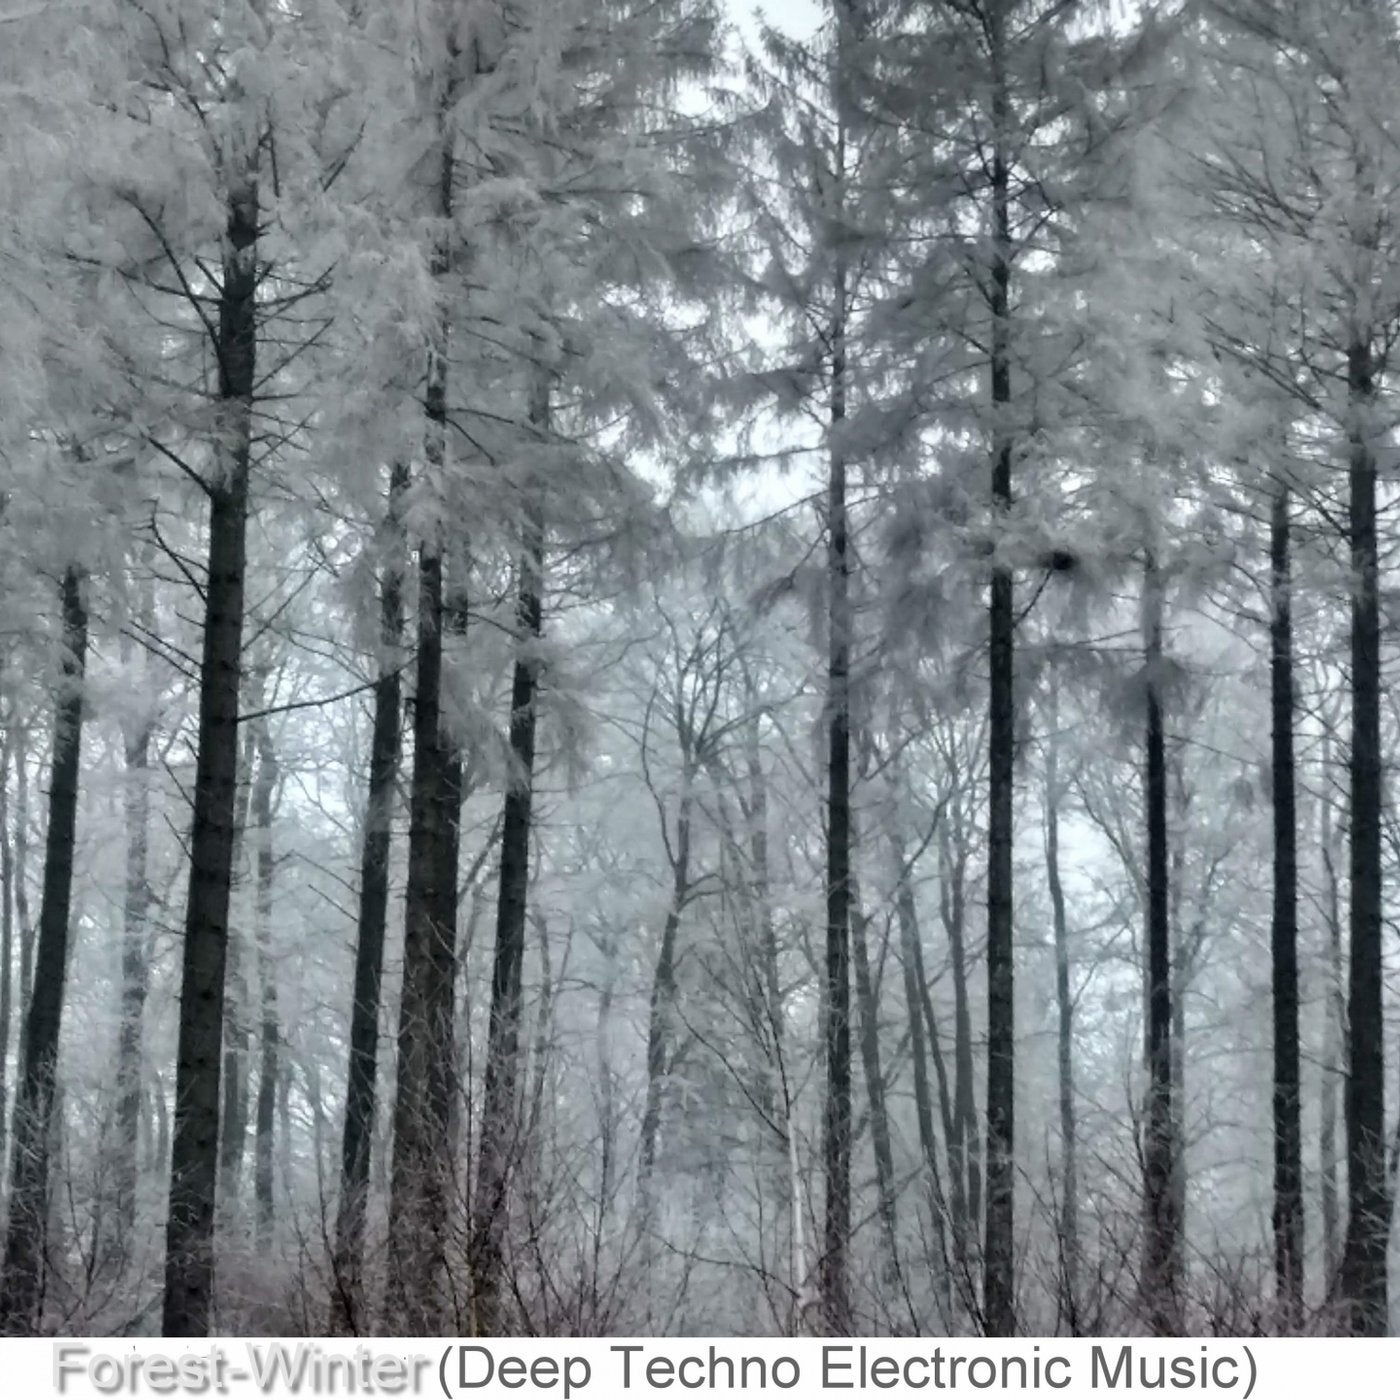 Forest-Winter (Deep Techno Electronic Music)